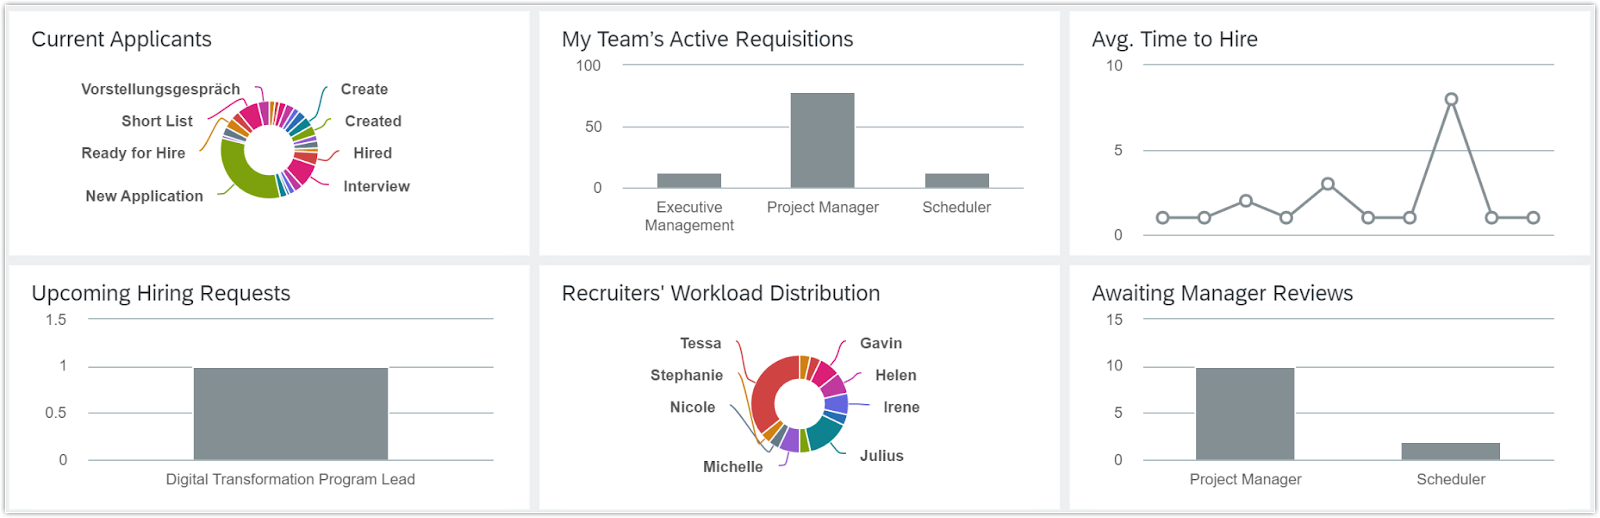 SAP SuccessFactors’ recruitment dashboard displays widgets for current applicants, active requisitions, average time to hire, upcoming hiring requests, recruiters' workload distribution, and hiring pipeline status.